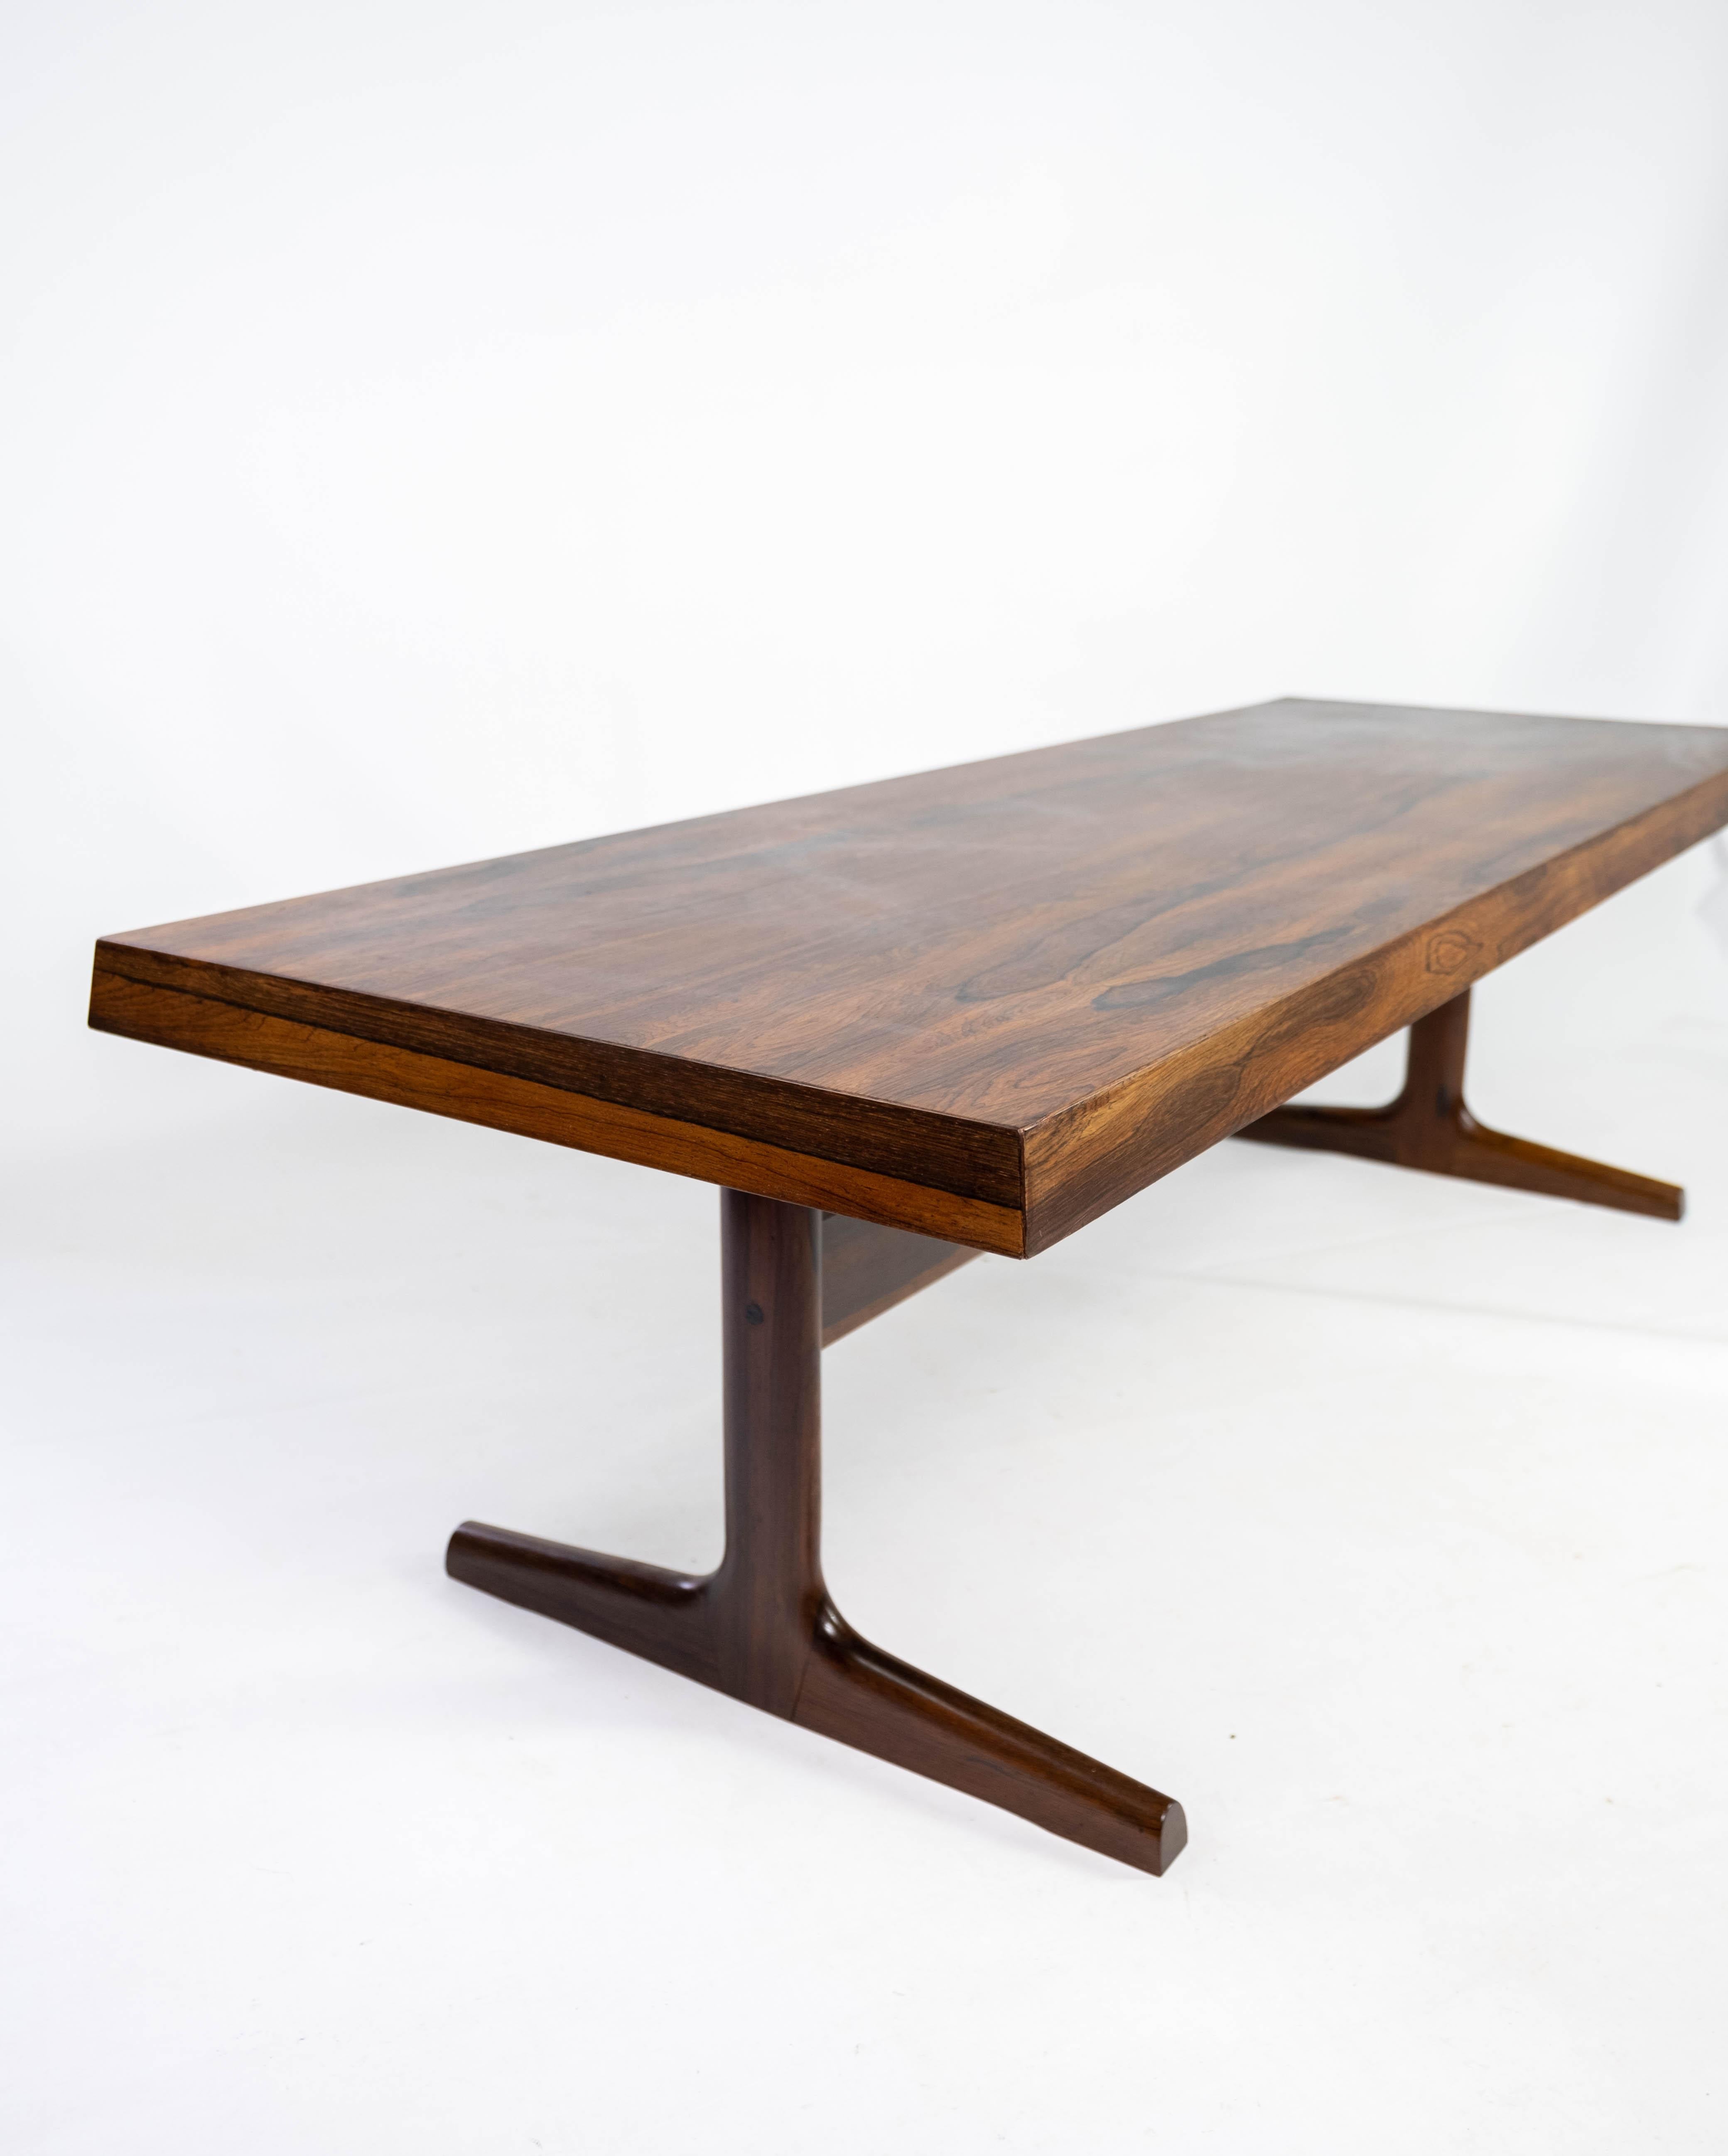 Coffee Table Made In Rosewood With Shaker Legs, Danish Design From 1960s For Sale 1